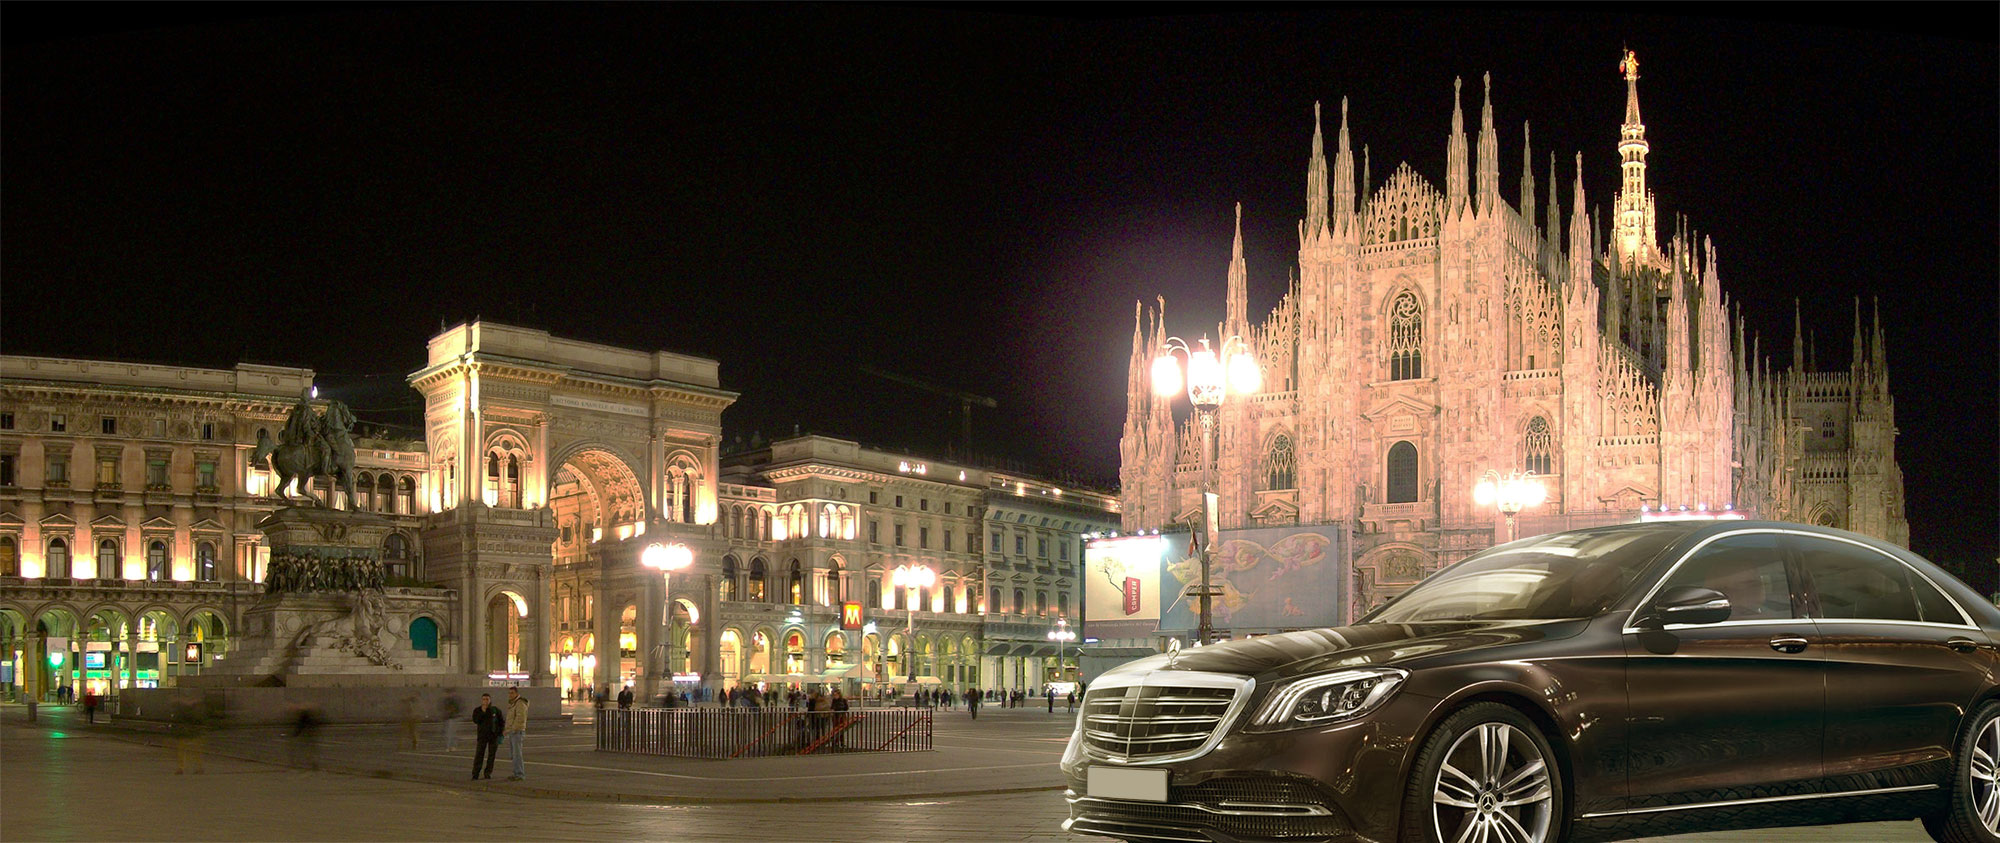 Photo of the Milan cathedral with one of the machines used for our services in the foreground